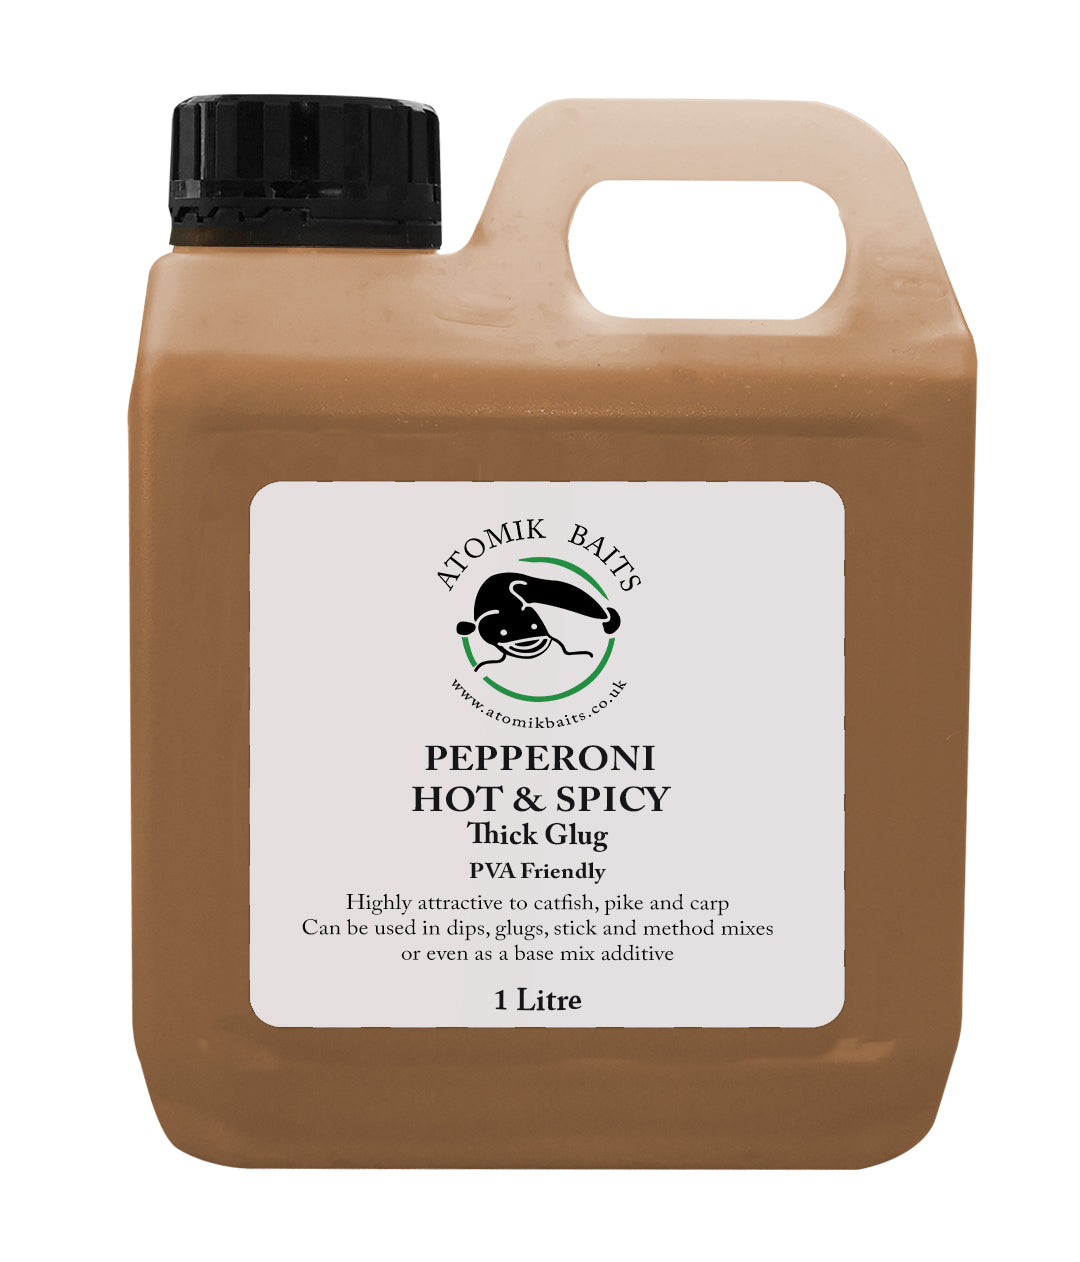 Pepperoni Hot & Spicy - Glug, Particle Feed, Liquid Additive, Dip -1 Litre 1000ml